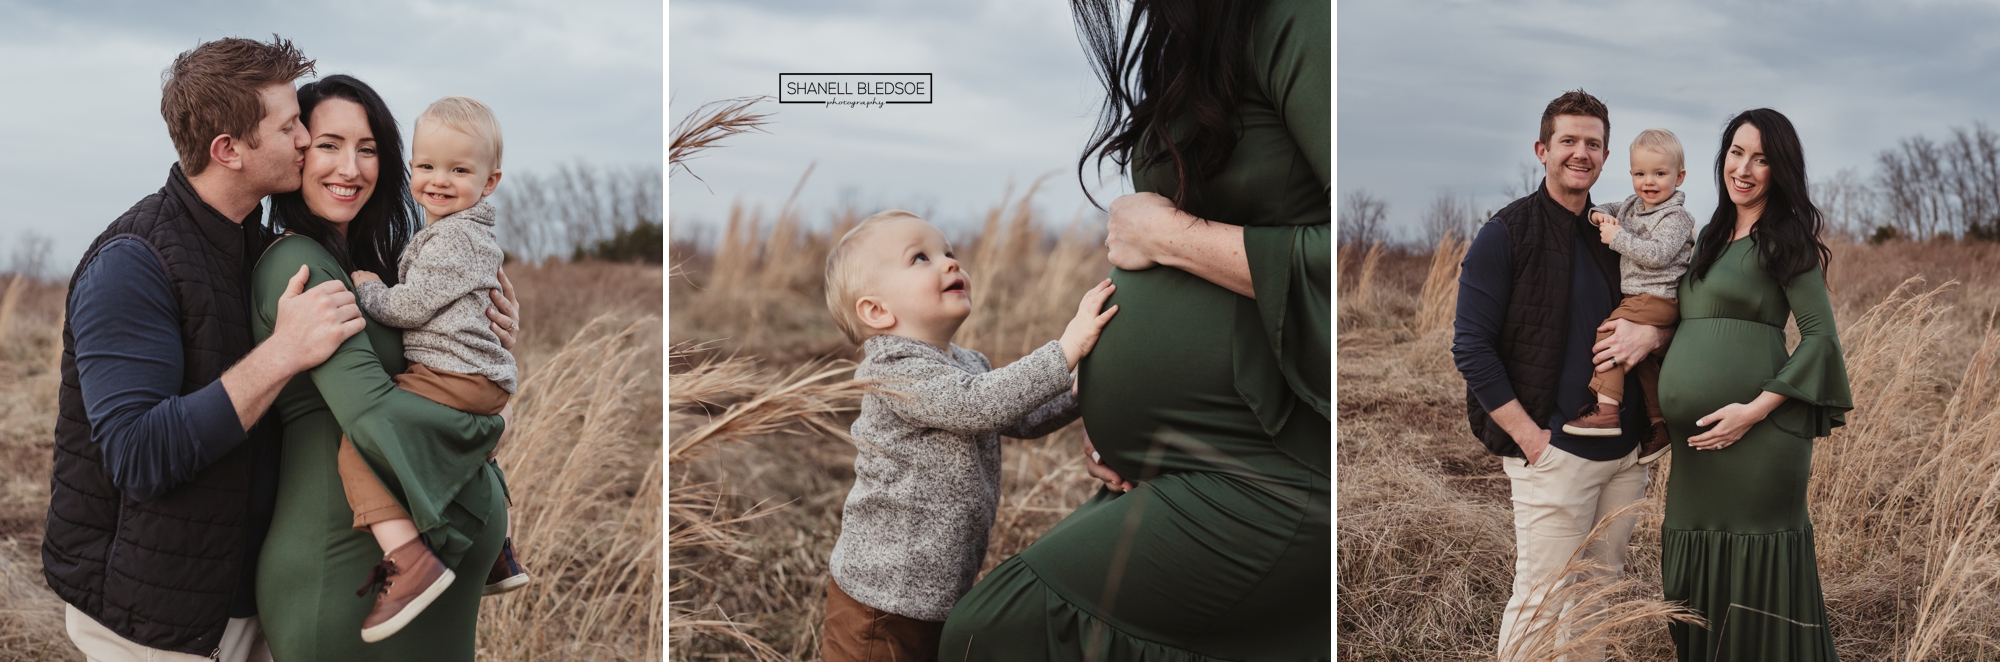 Tennessee maternity photos with toddler